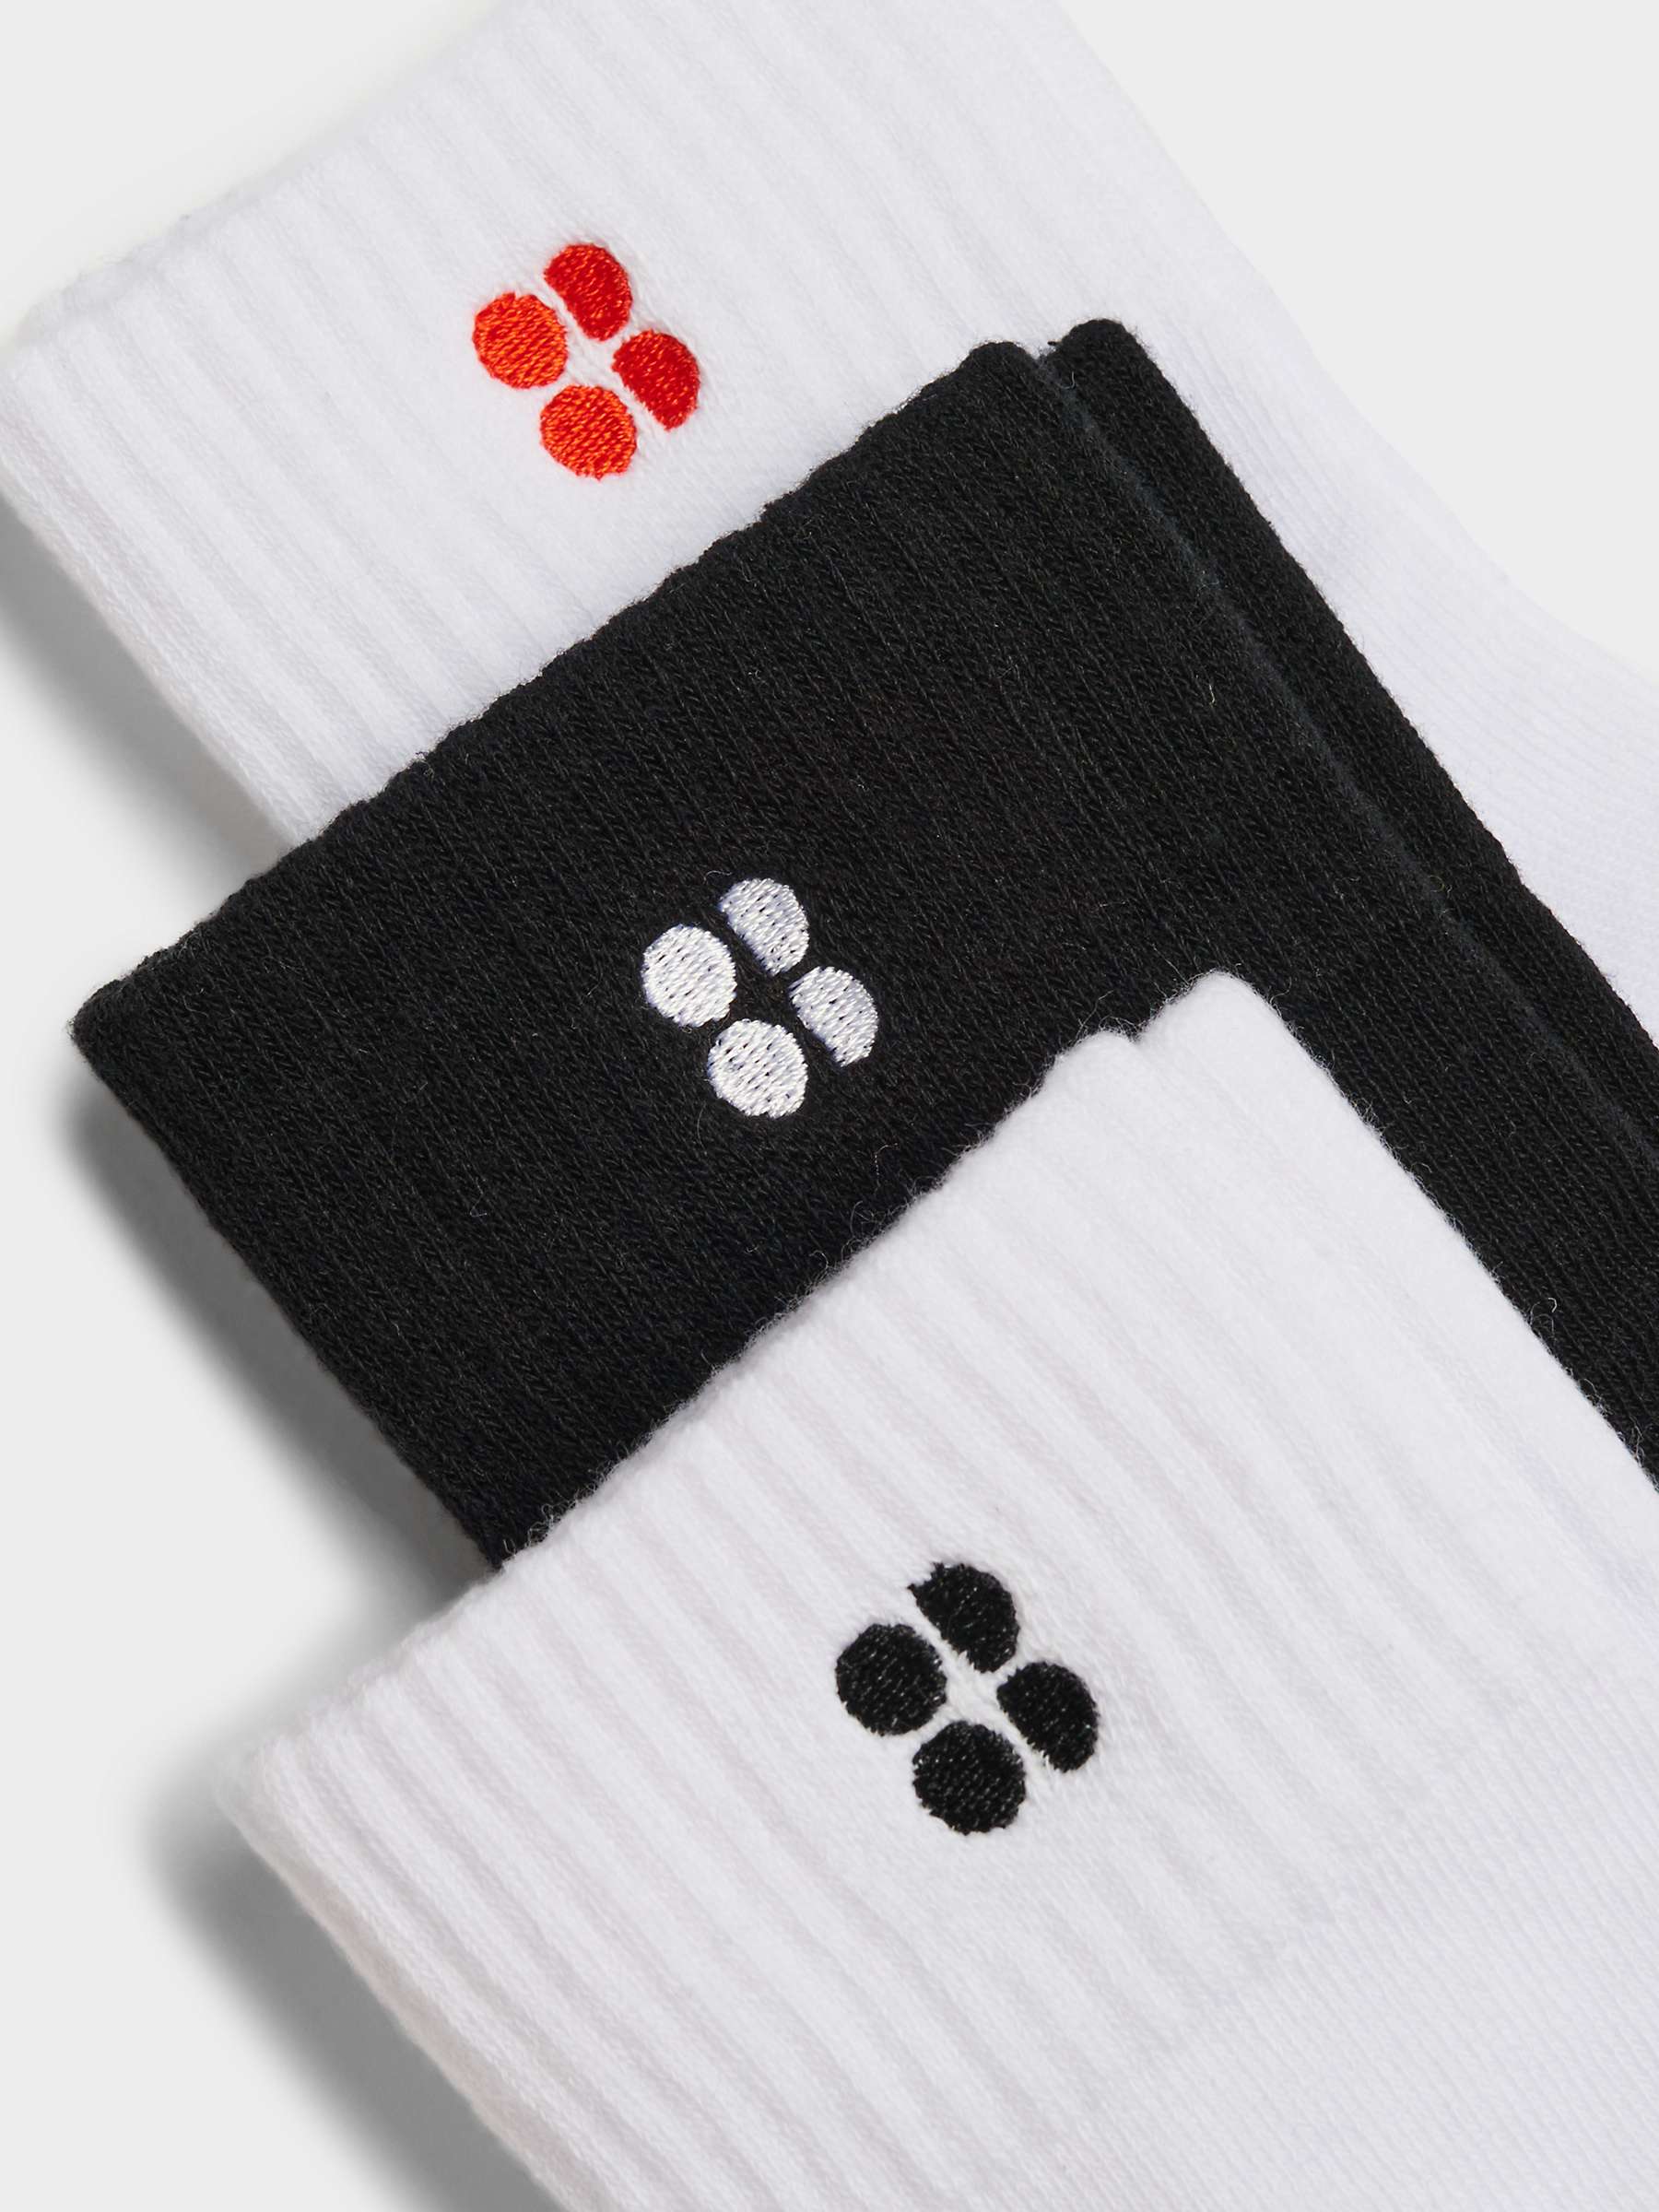 Buy Sweaty Betty Essentials Ankle Socks, Pack of 3 Online at johnlewis.com